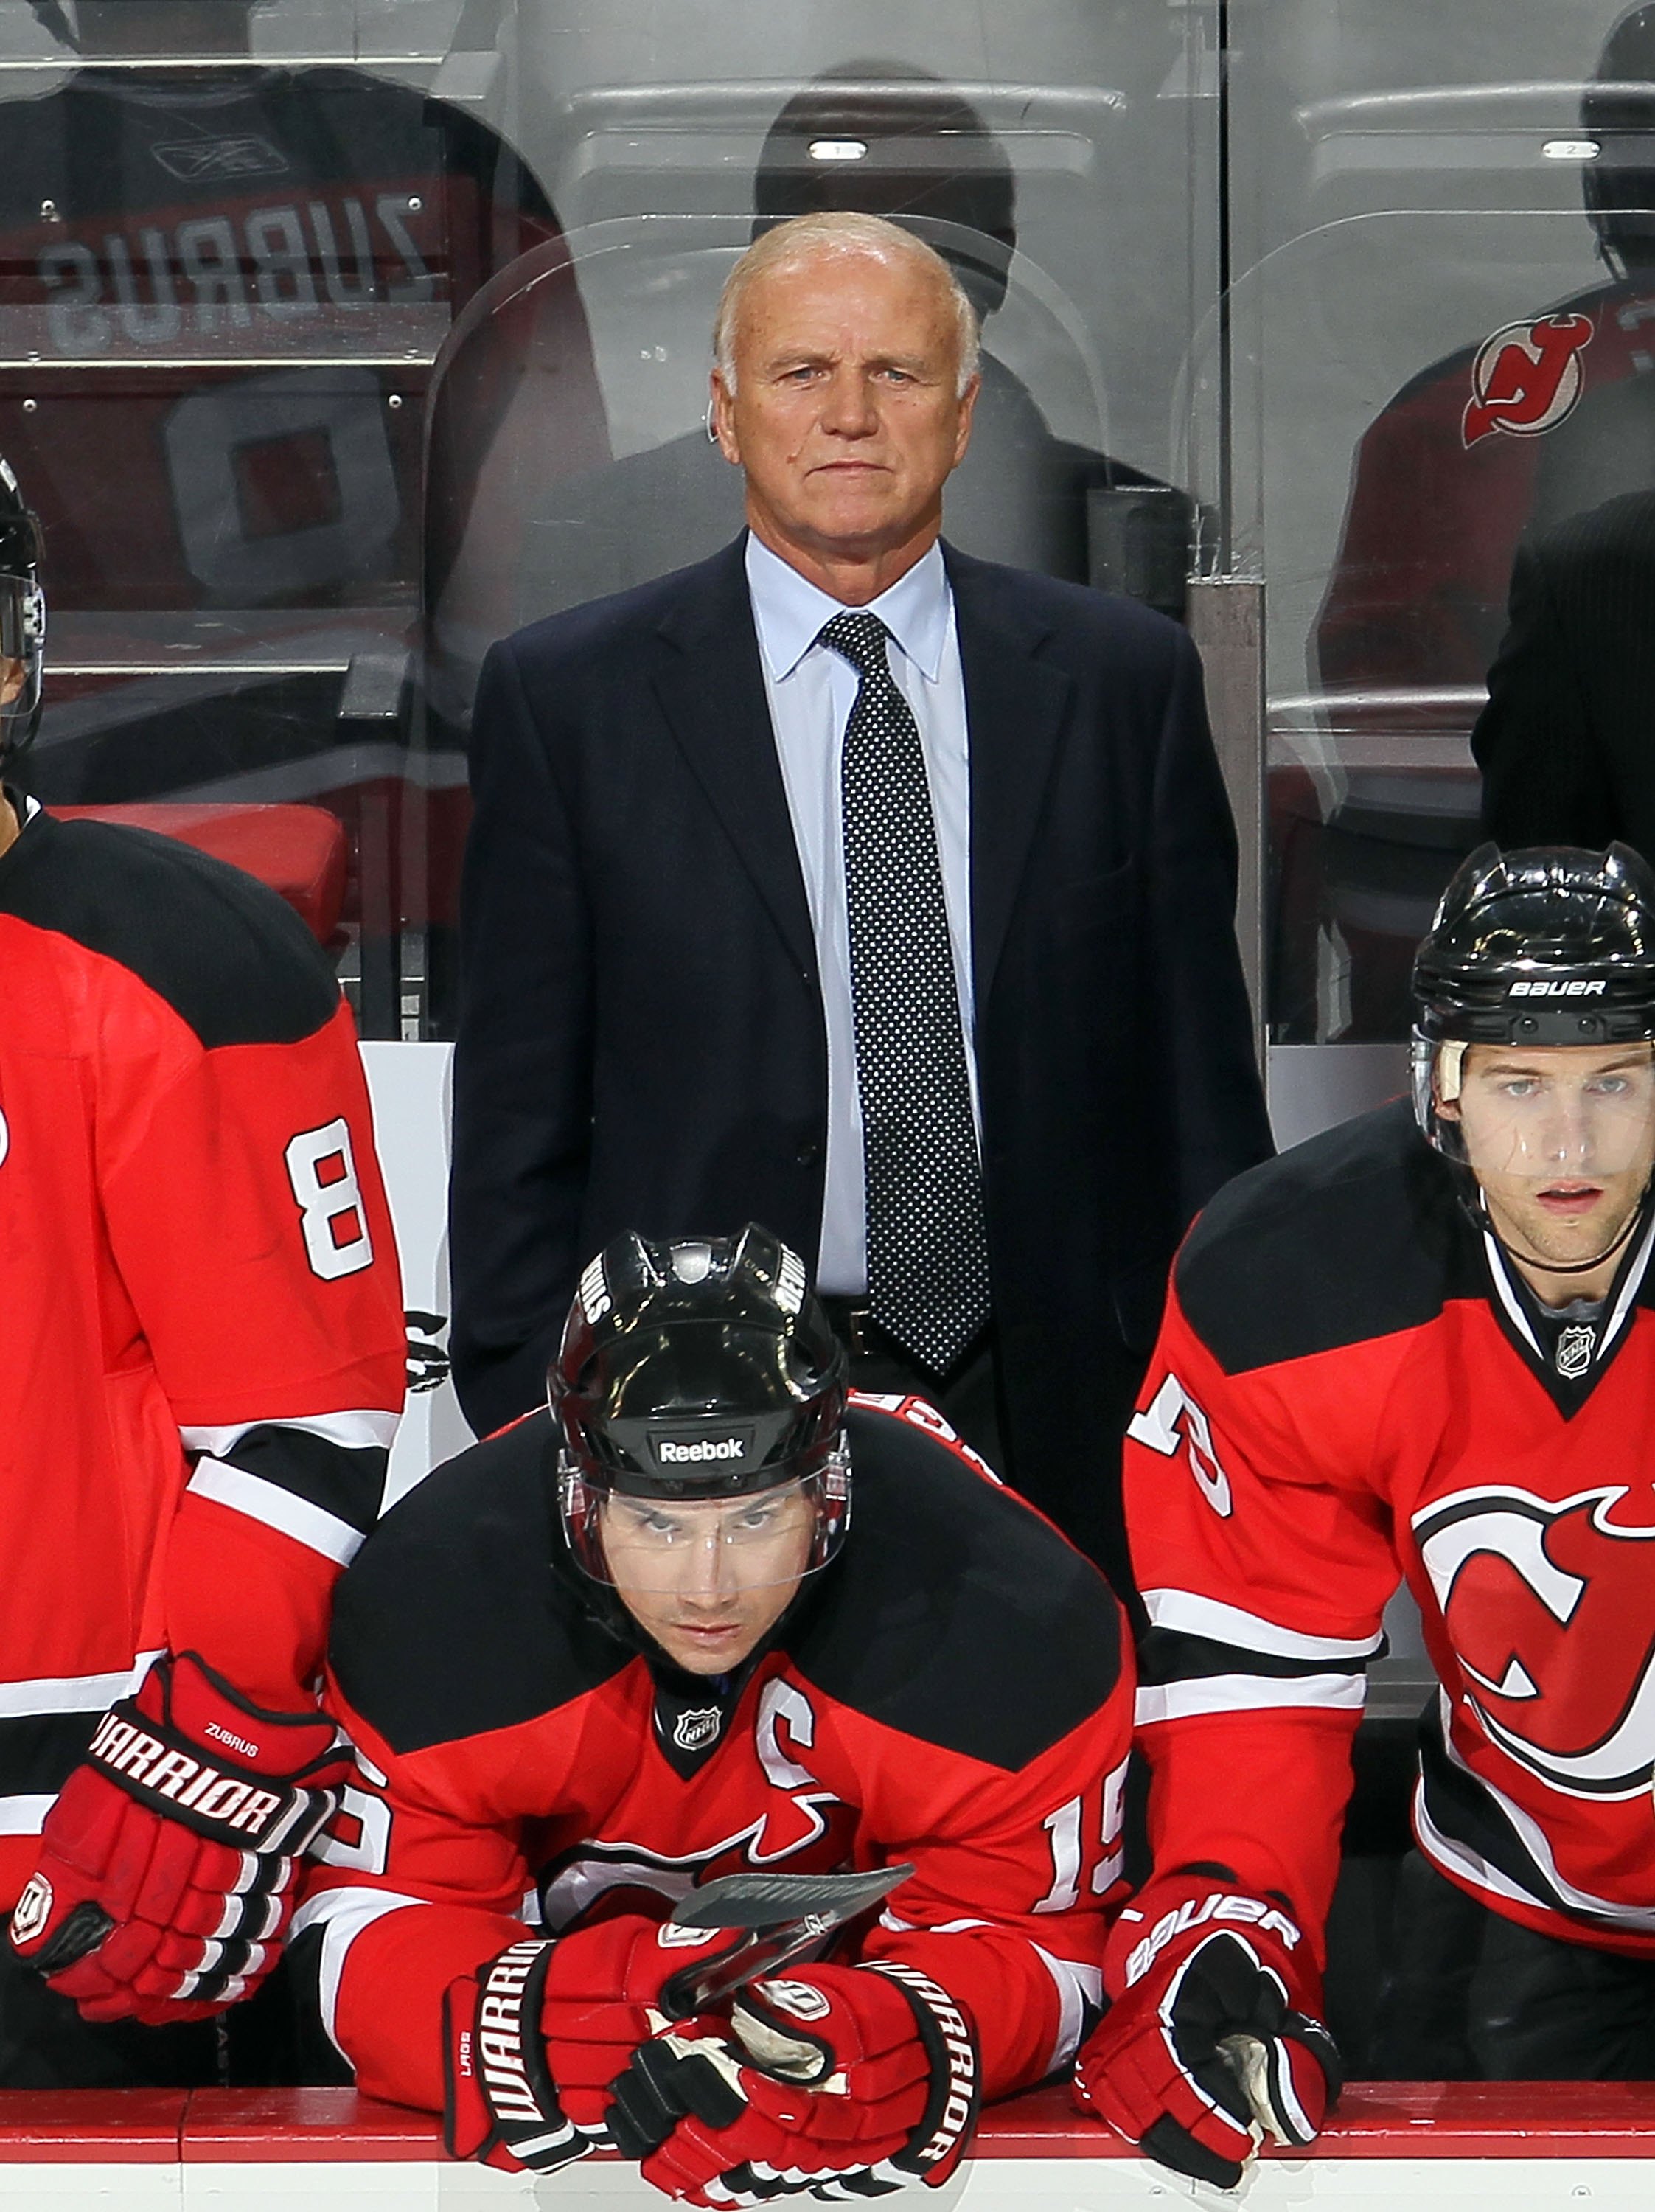 Flyers Coaching Candidate: Kirk Muller